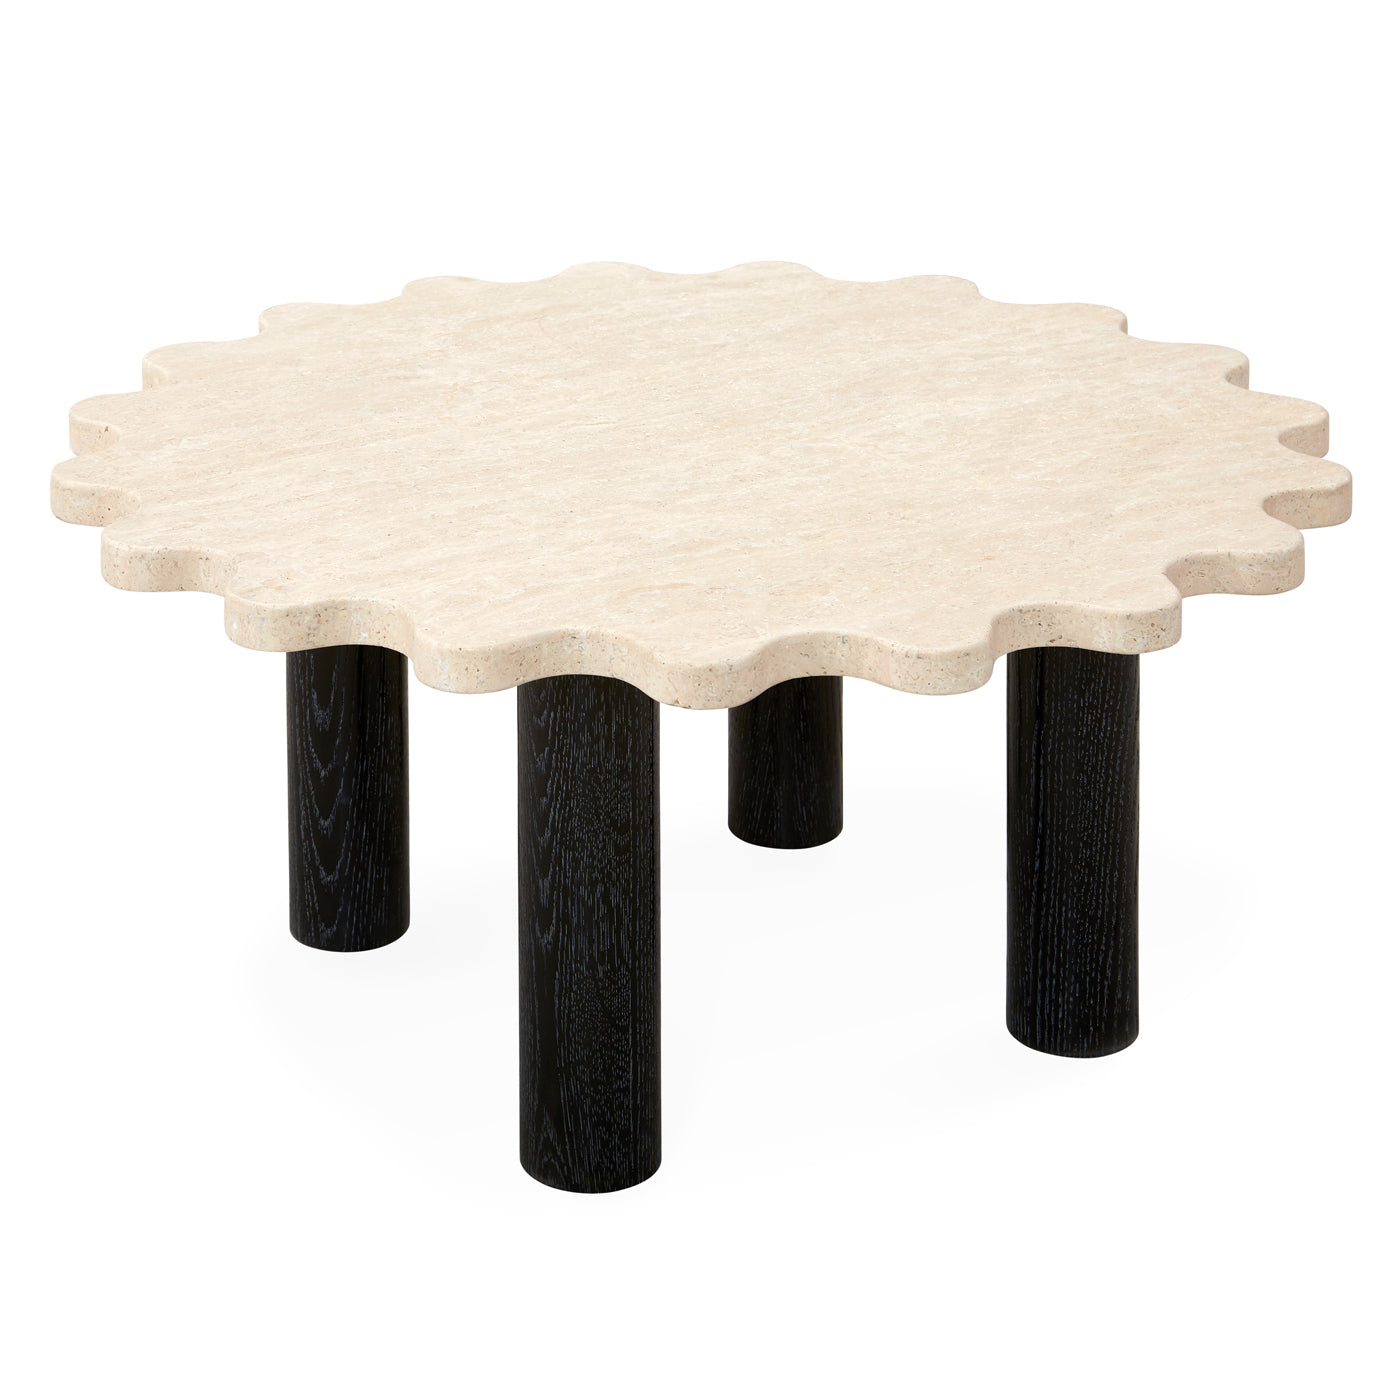 Ripple Round Cocktail Table